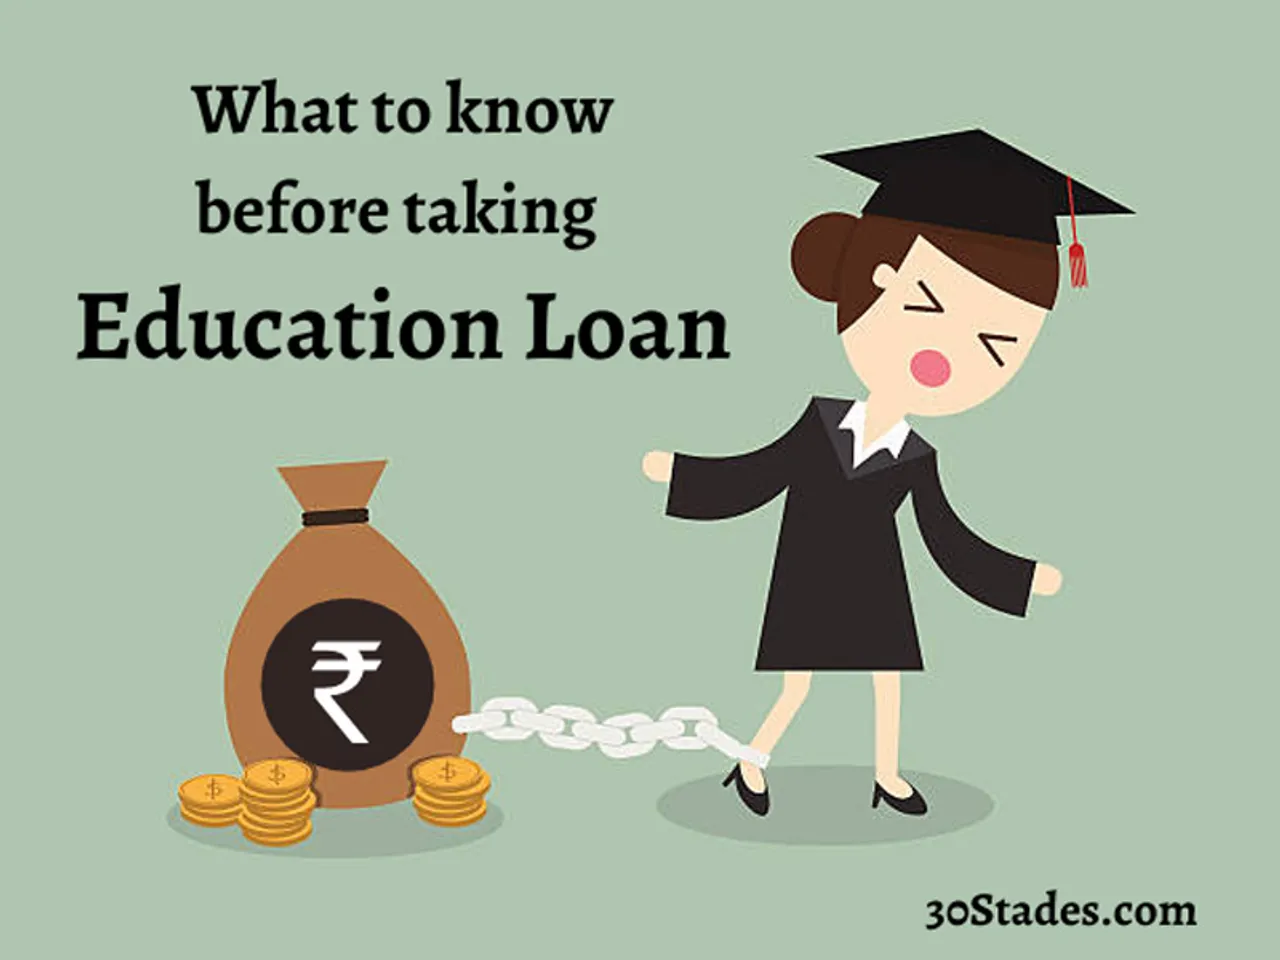 5 things to know before taking education loan for higher studies